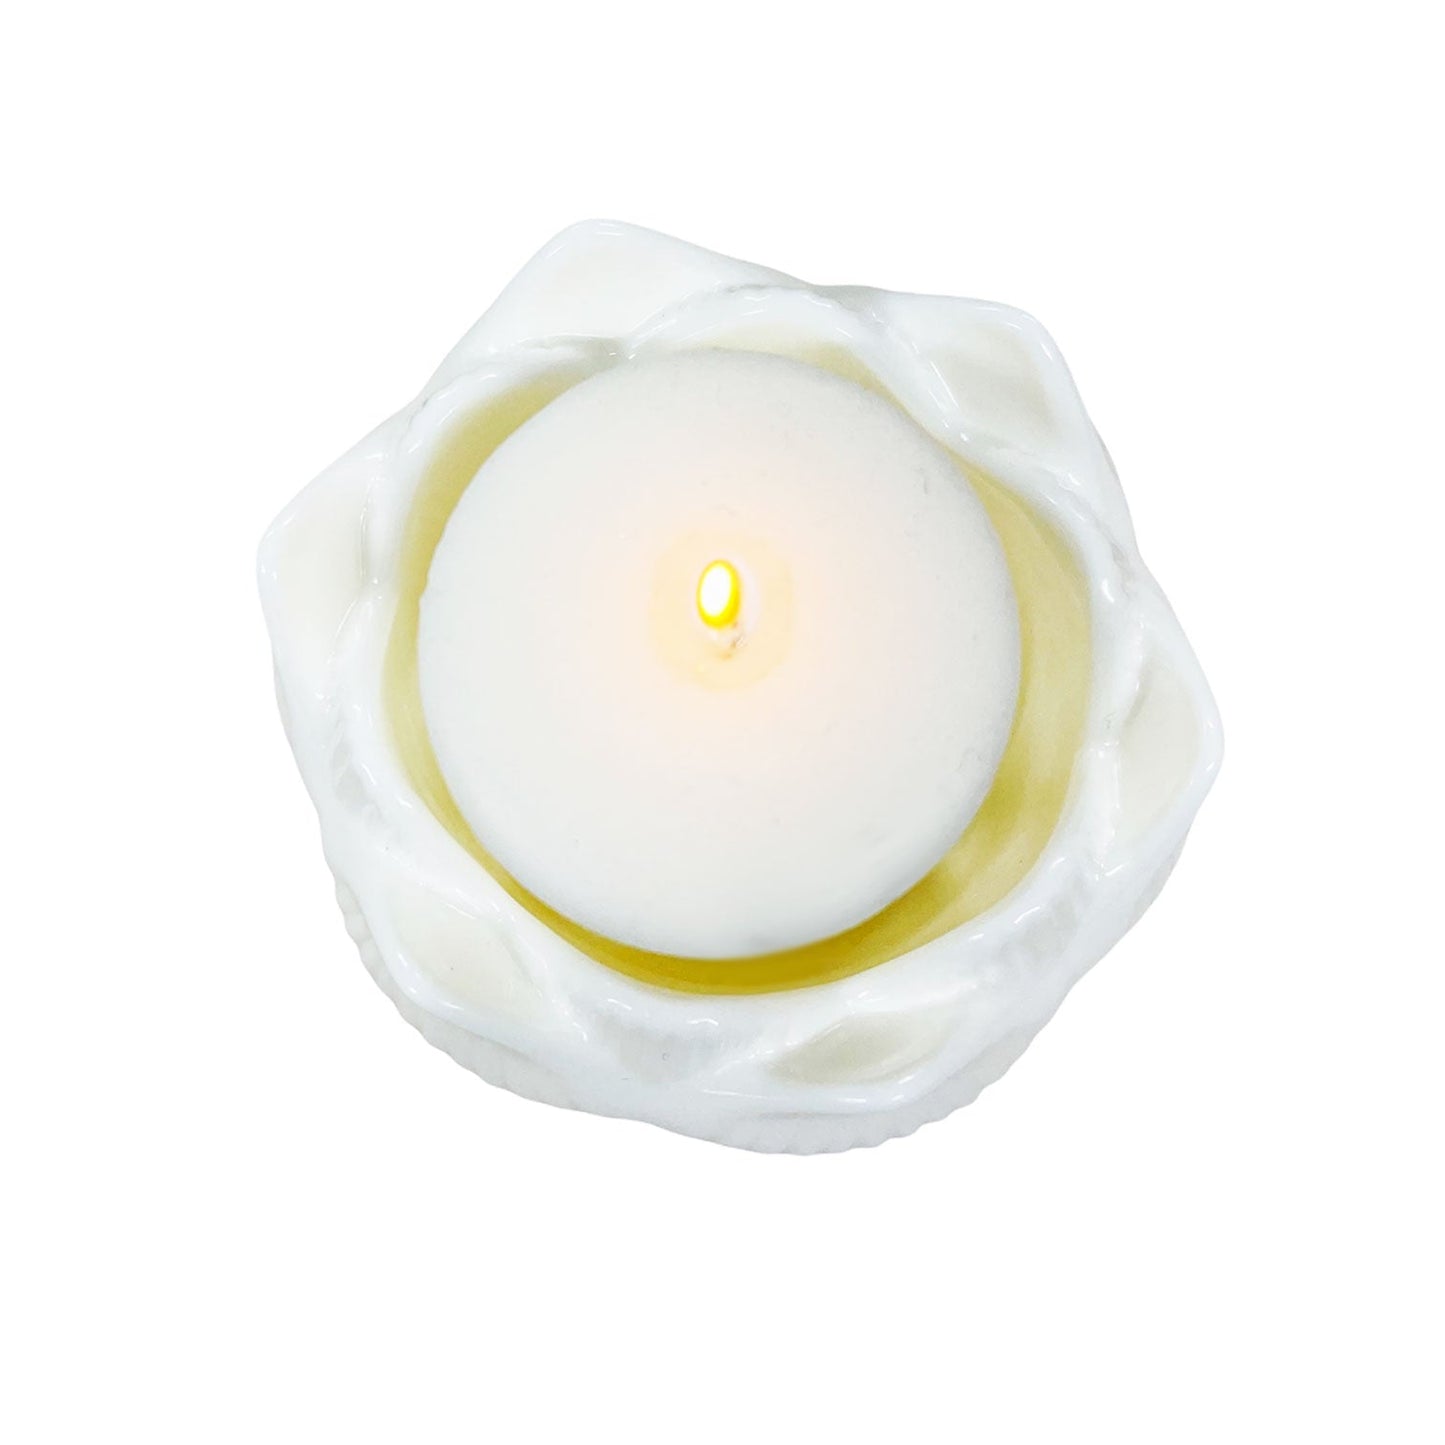 Memorial Flower Petals Votive Holder With Wax Candle - Celebrate Prints